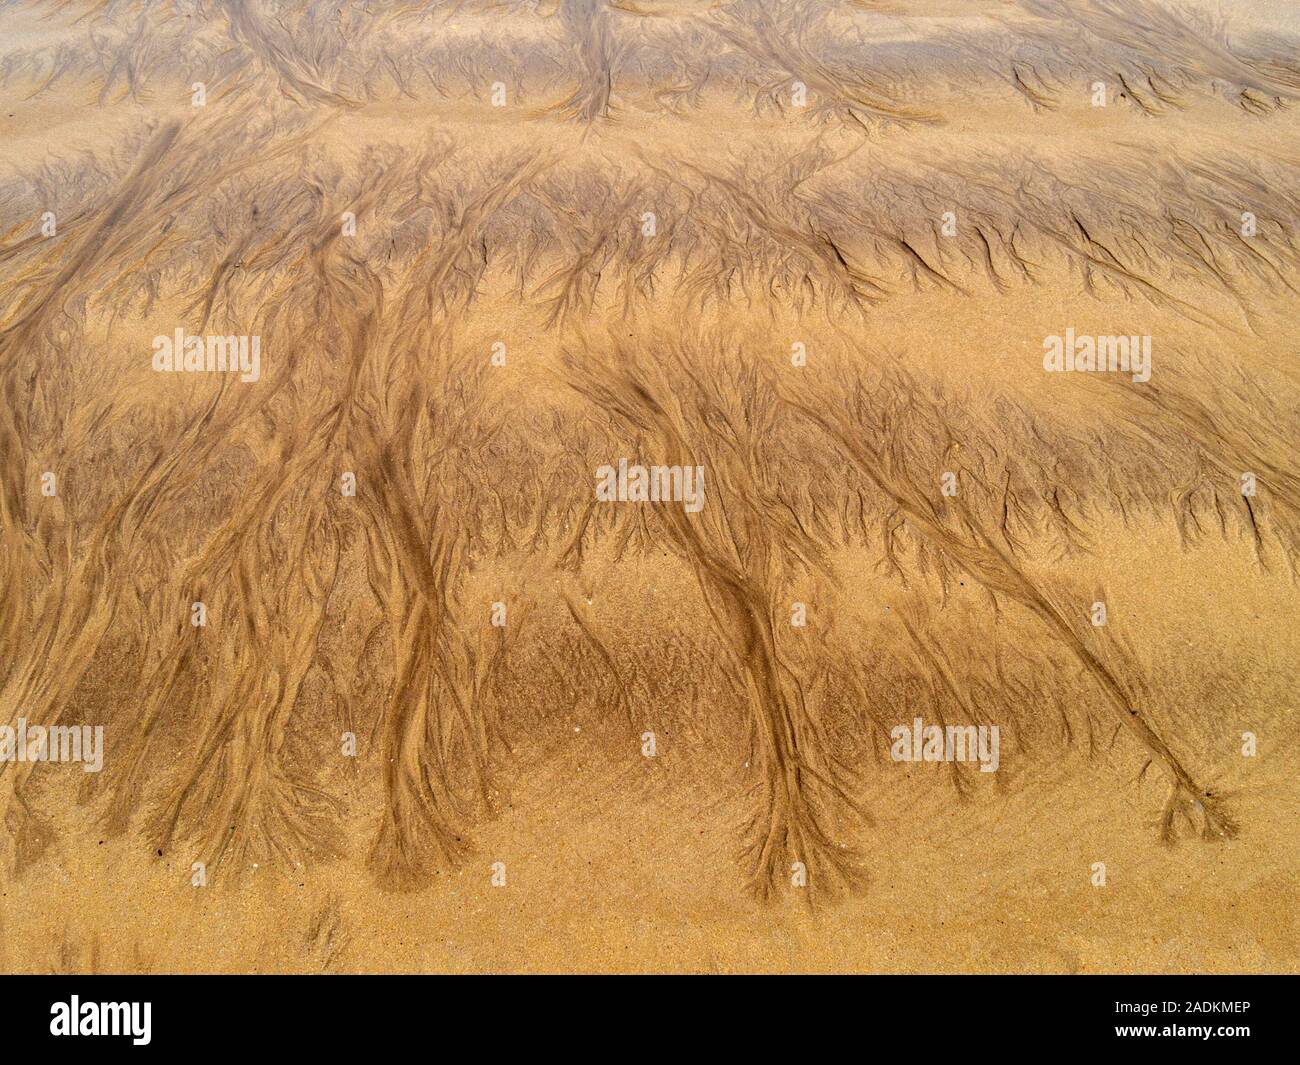 Patterns in golden beach sand caused by flowing water Stock Photo